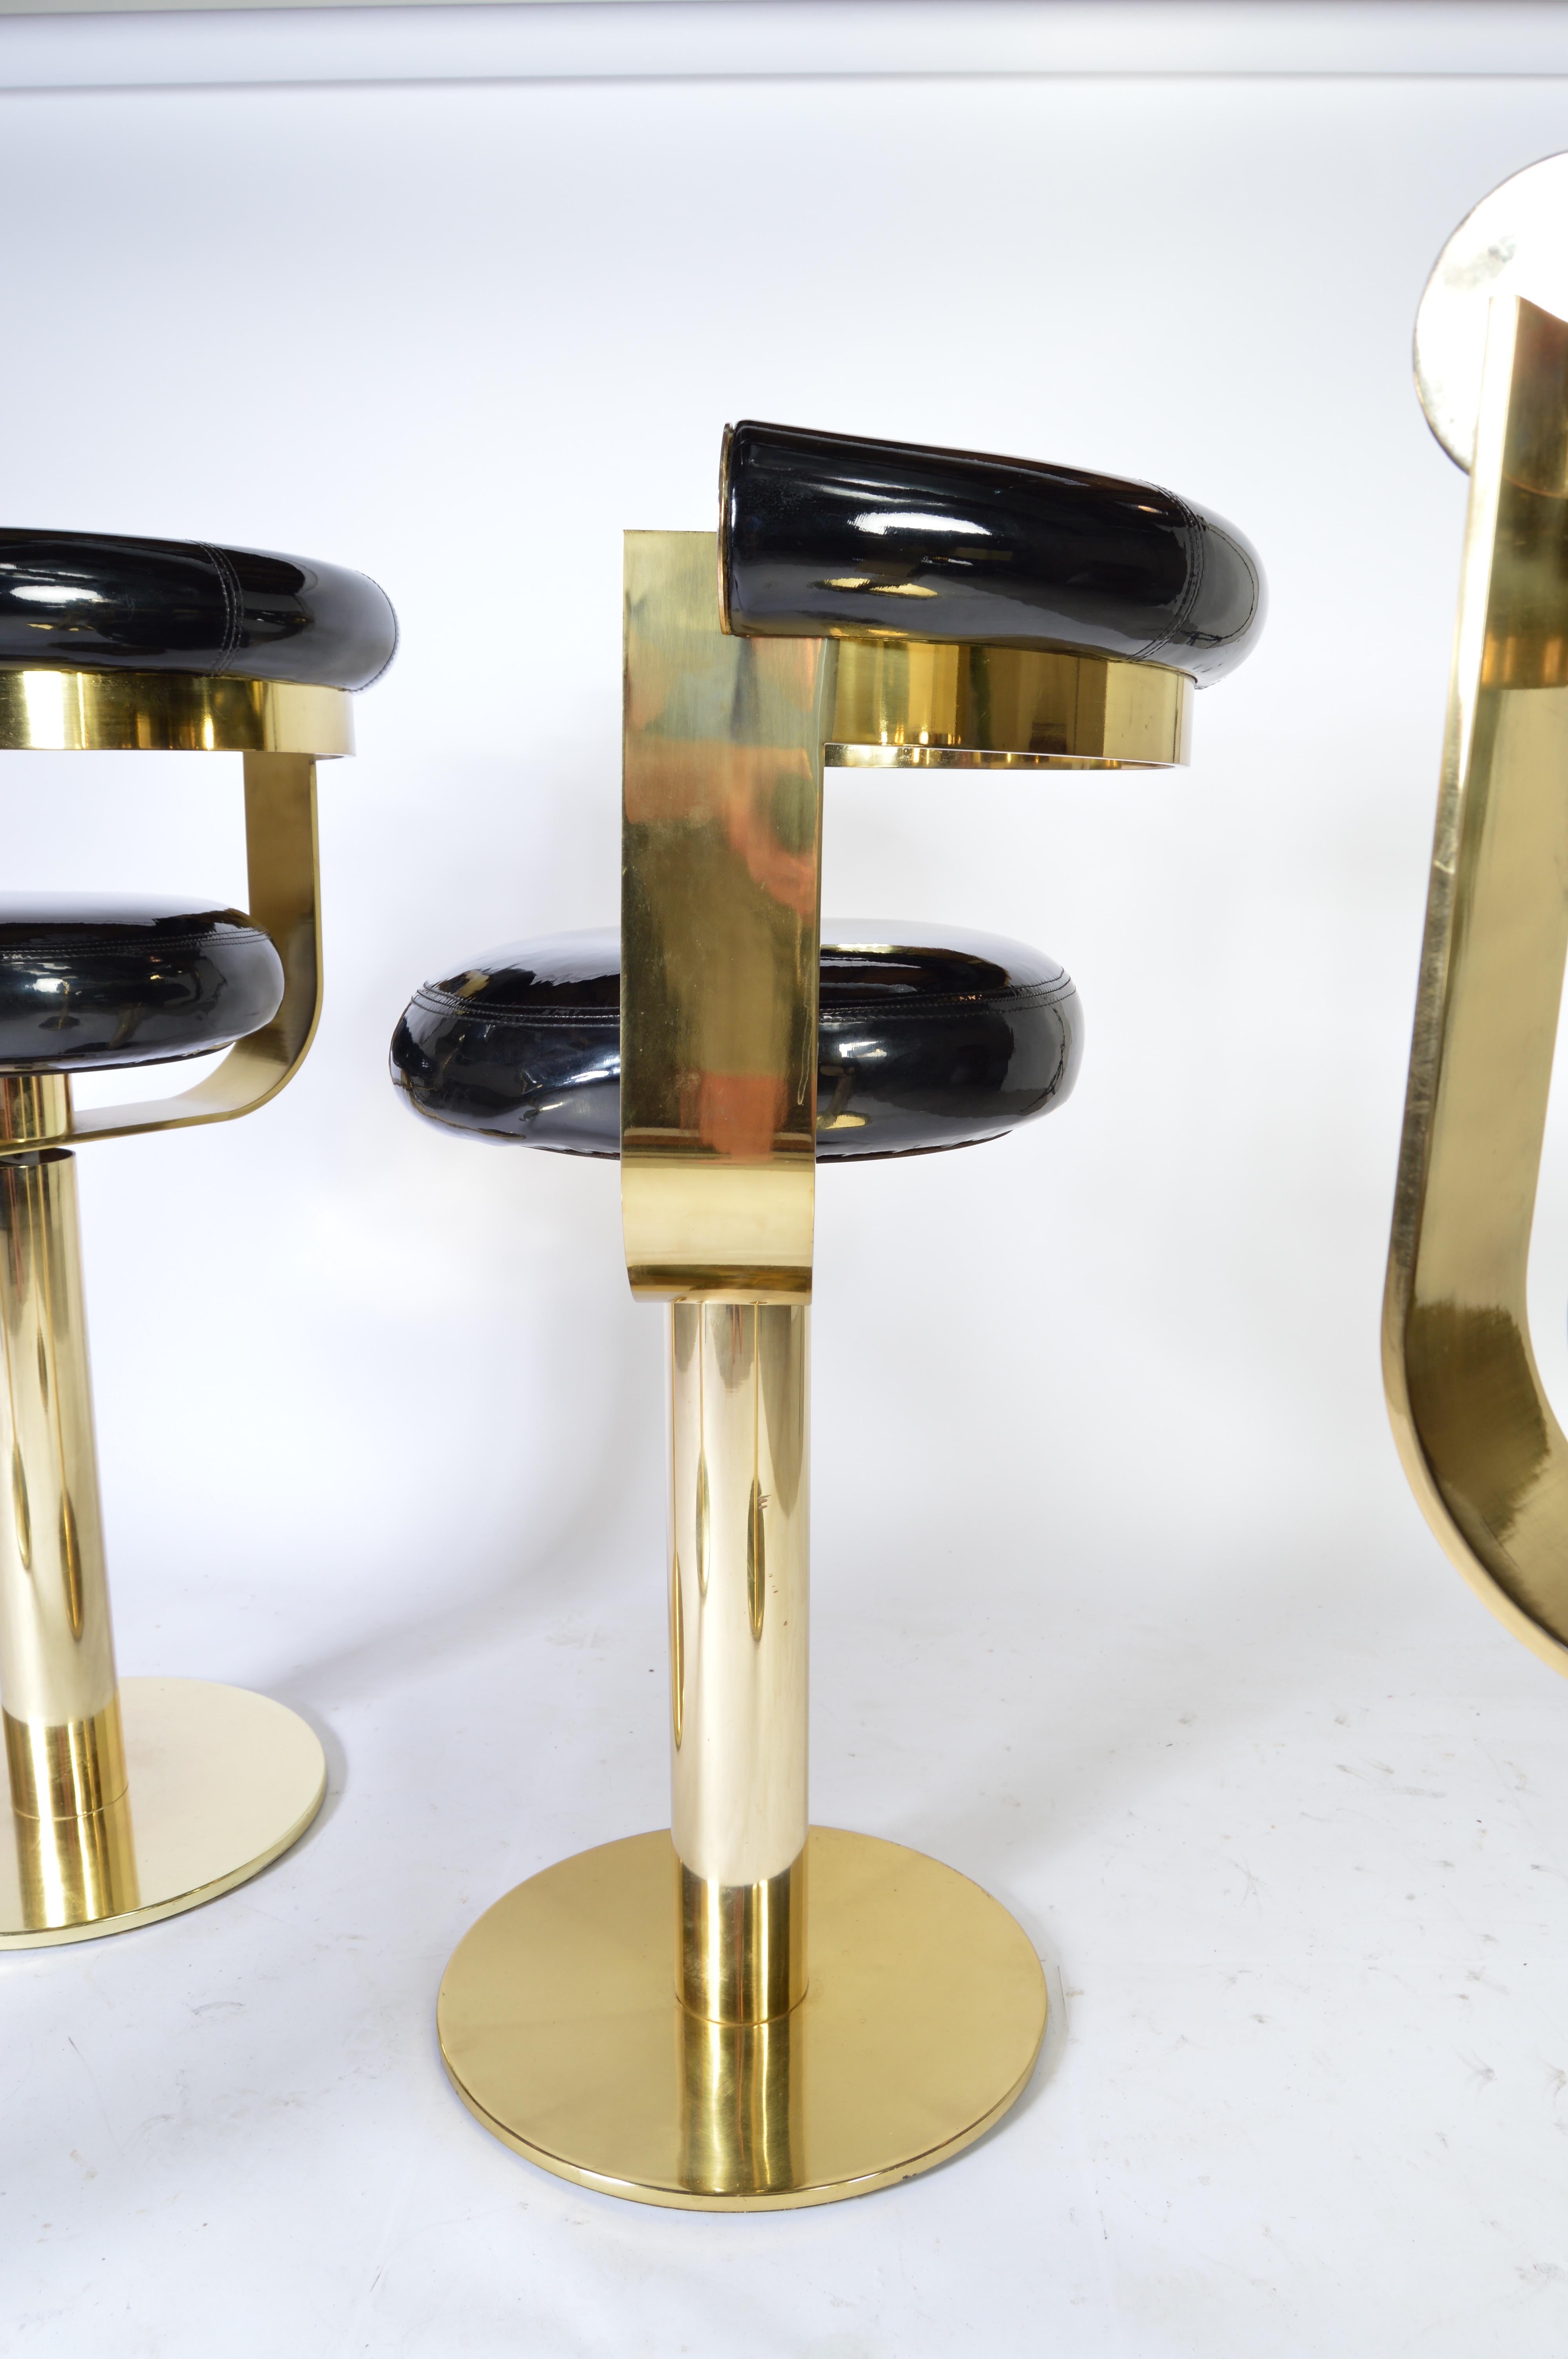 Late 20th Century Custom Brass Counter Bar Stools in the Manner of Design For Leisure, circa 1970